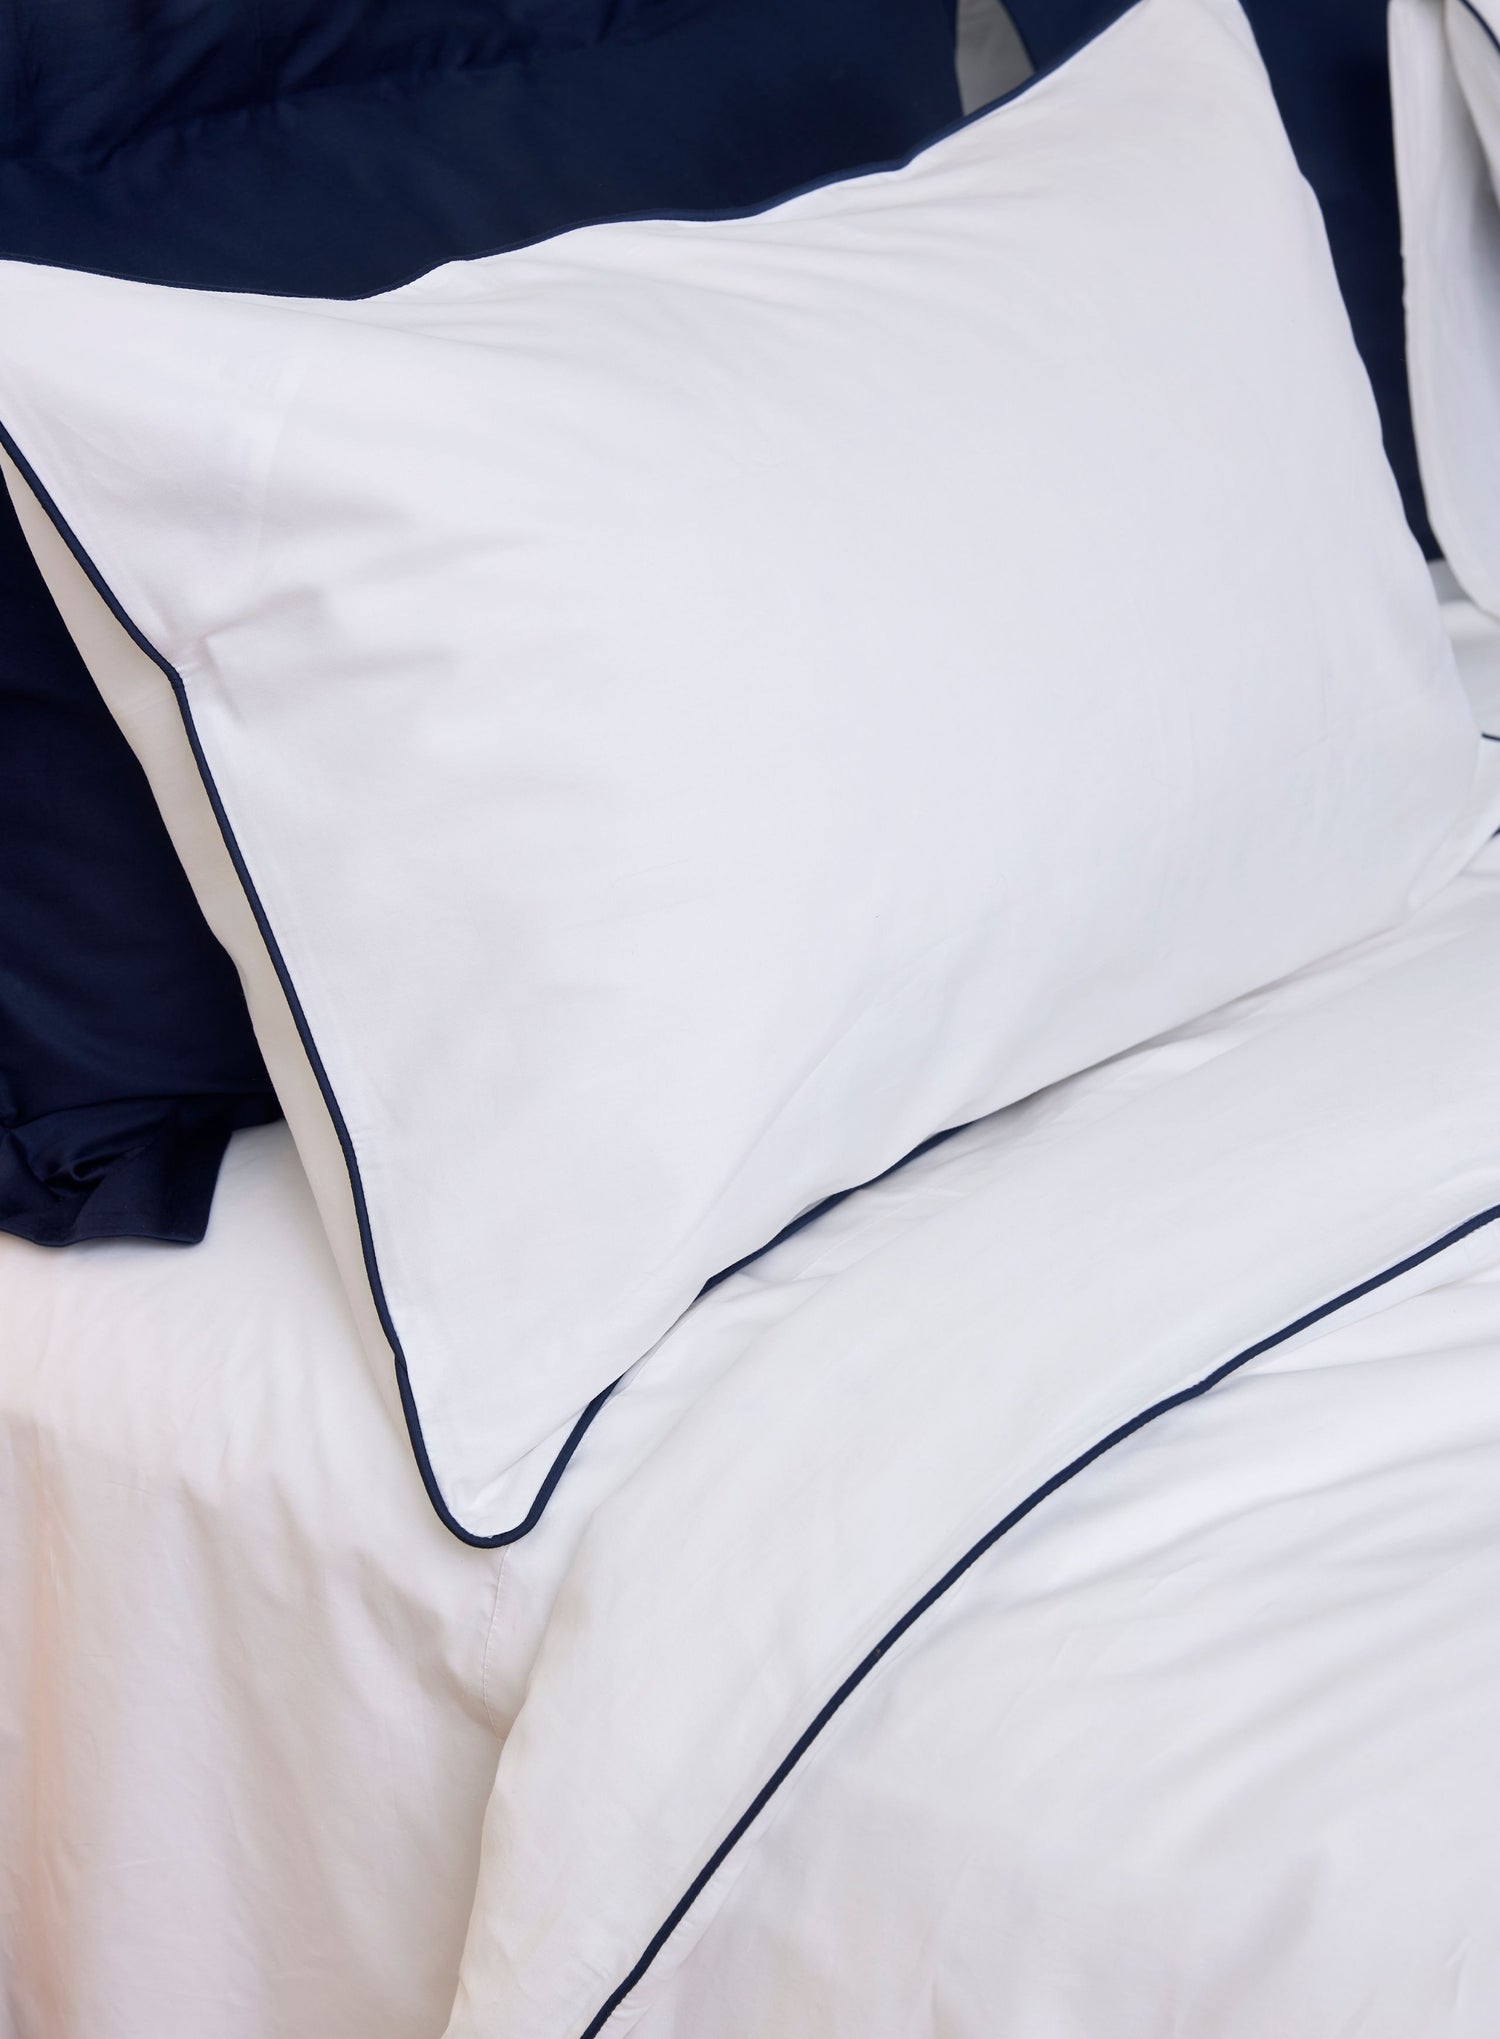 Pillowcase Pair - Piped Edge in Navy